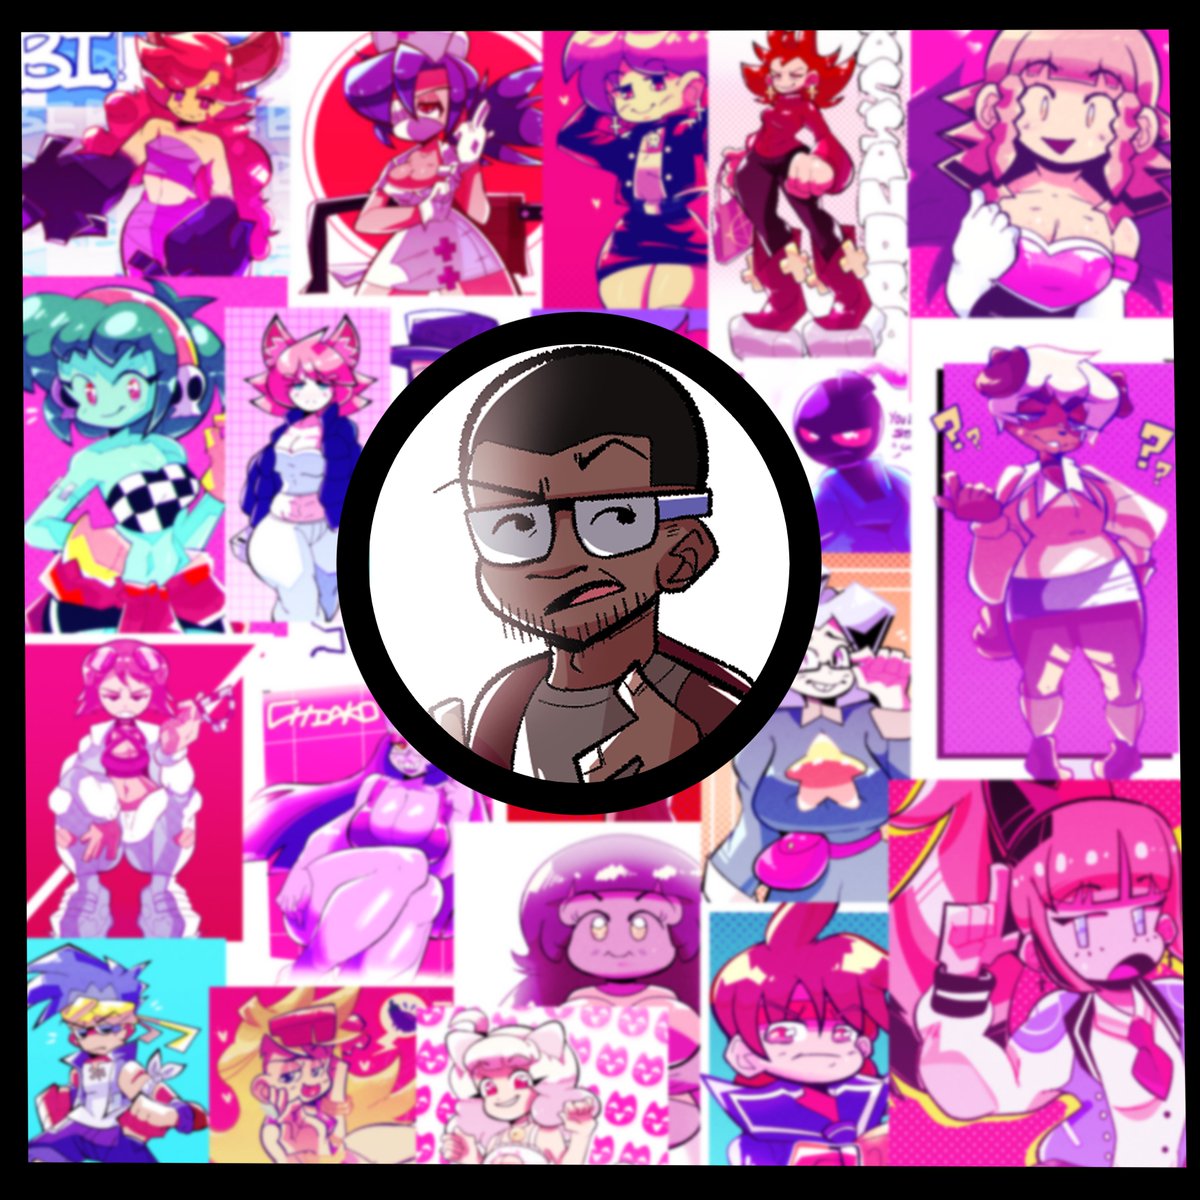 #JuneTeenth2021 // #ImReallyBlack 

hello! i go by nokko online, and i'm a freelance 2d animator and character artist/designer drawing all things stylized.

my main source of income is currently my commissions, which are open:
https://t.co/j92JxEUVBX 